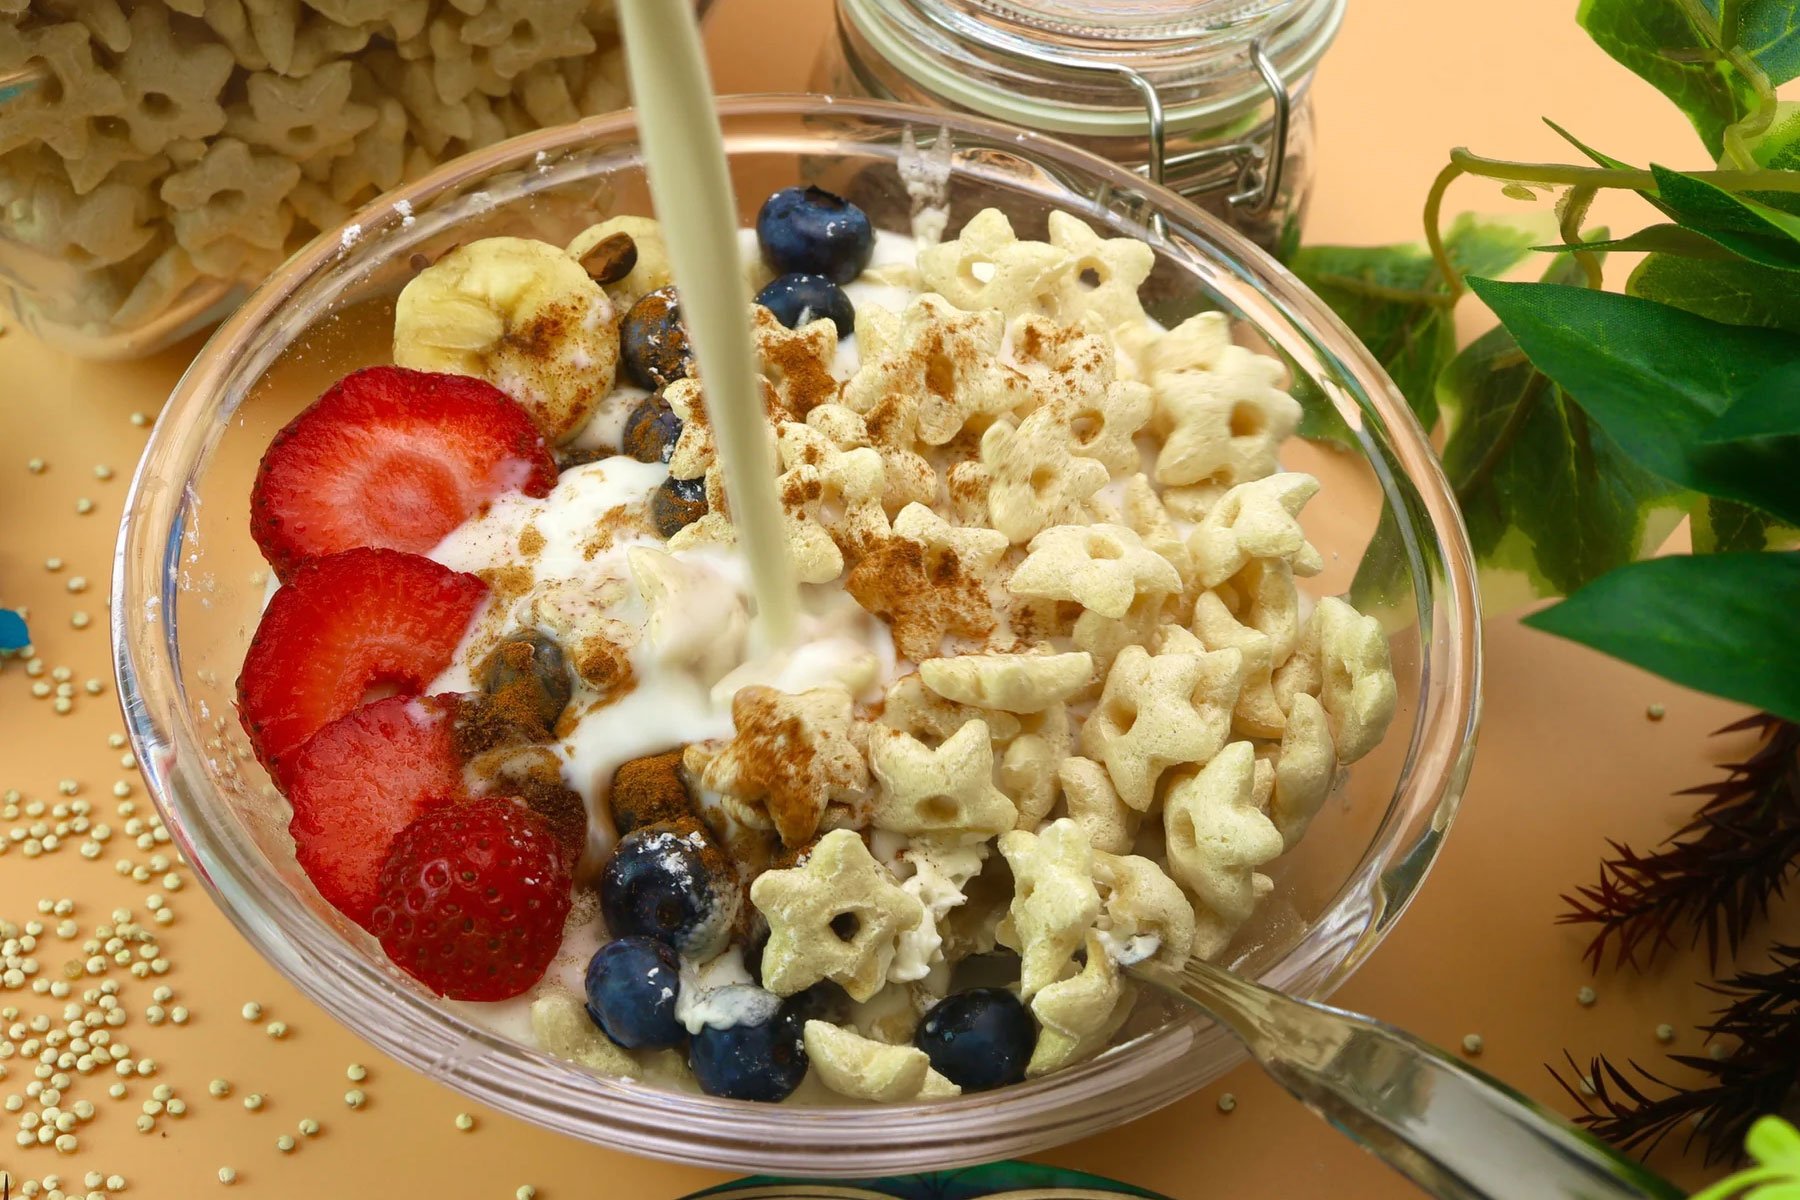 Are low-carb cereals really healthier?